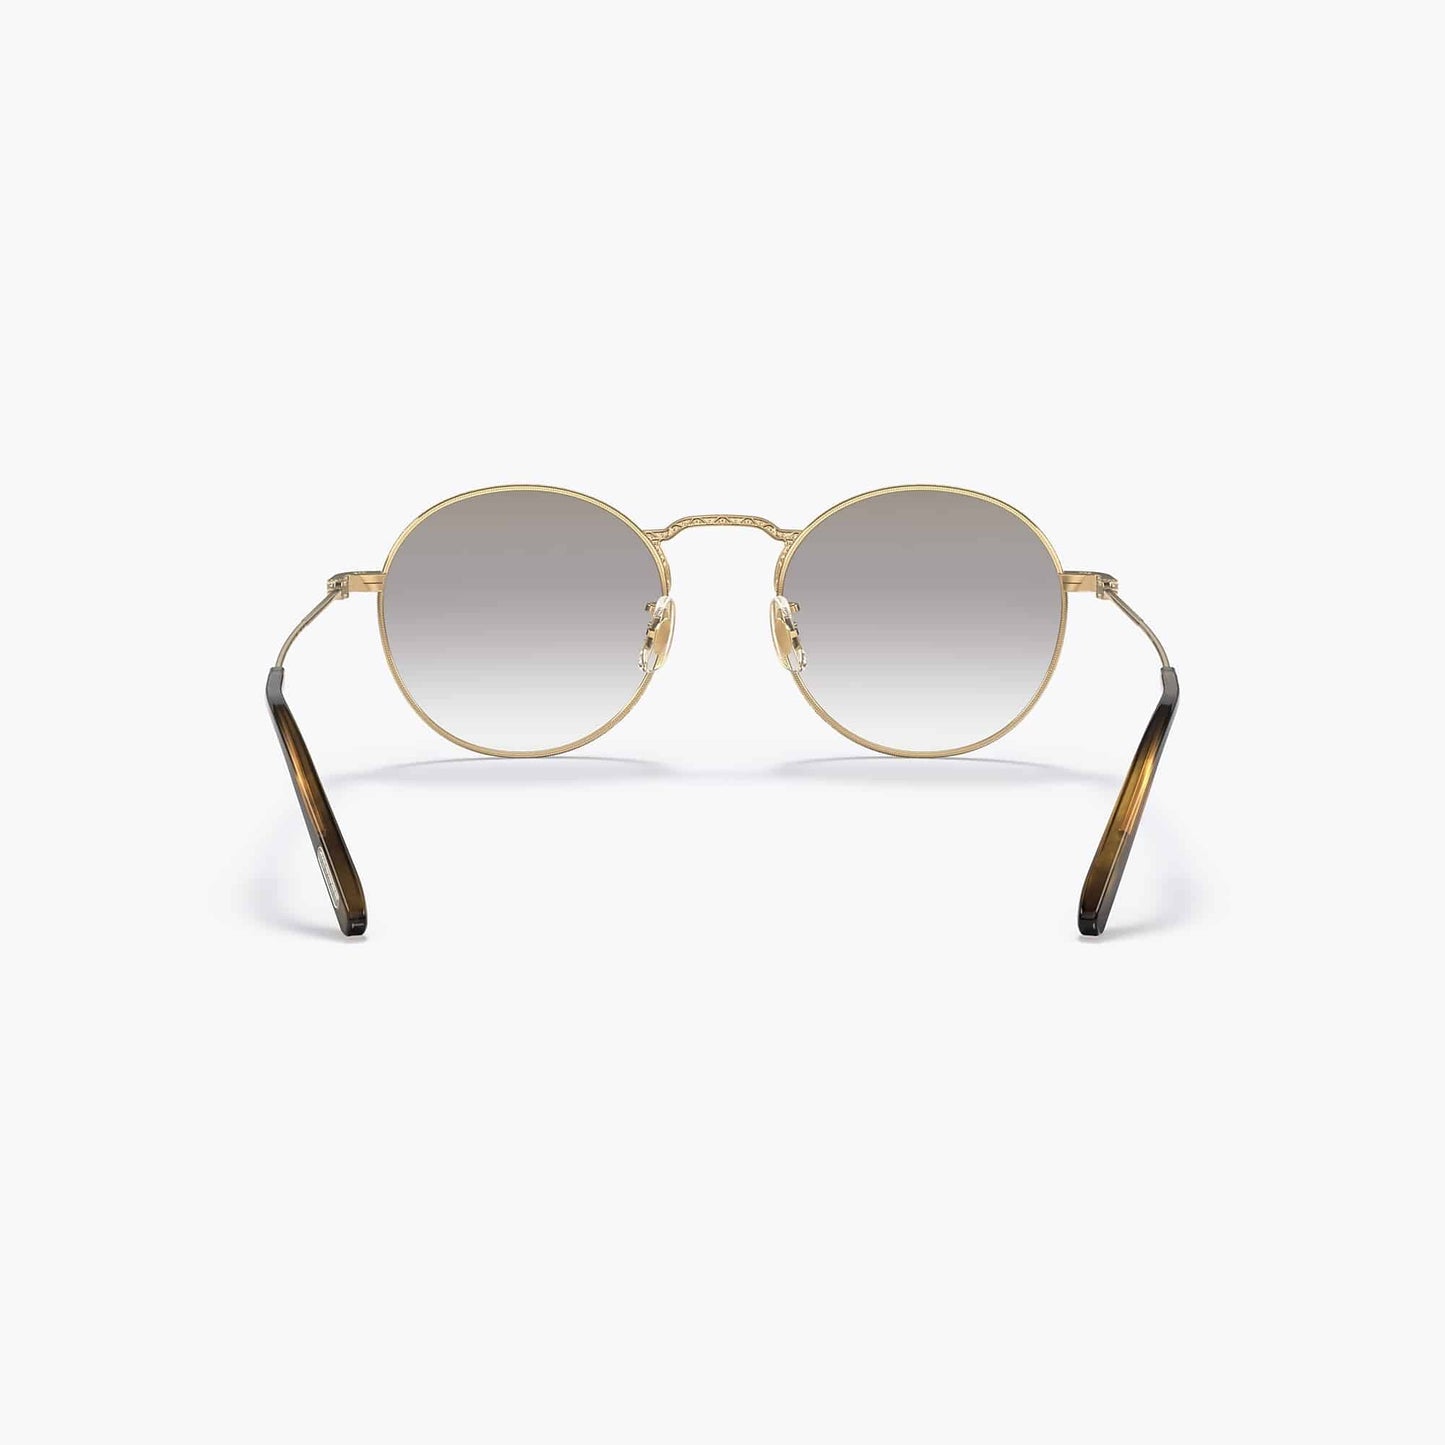 Oliver Peoples - Weslie Sun Round Sunglasses - Gold / Shaded Gray